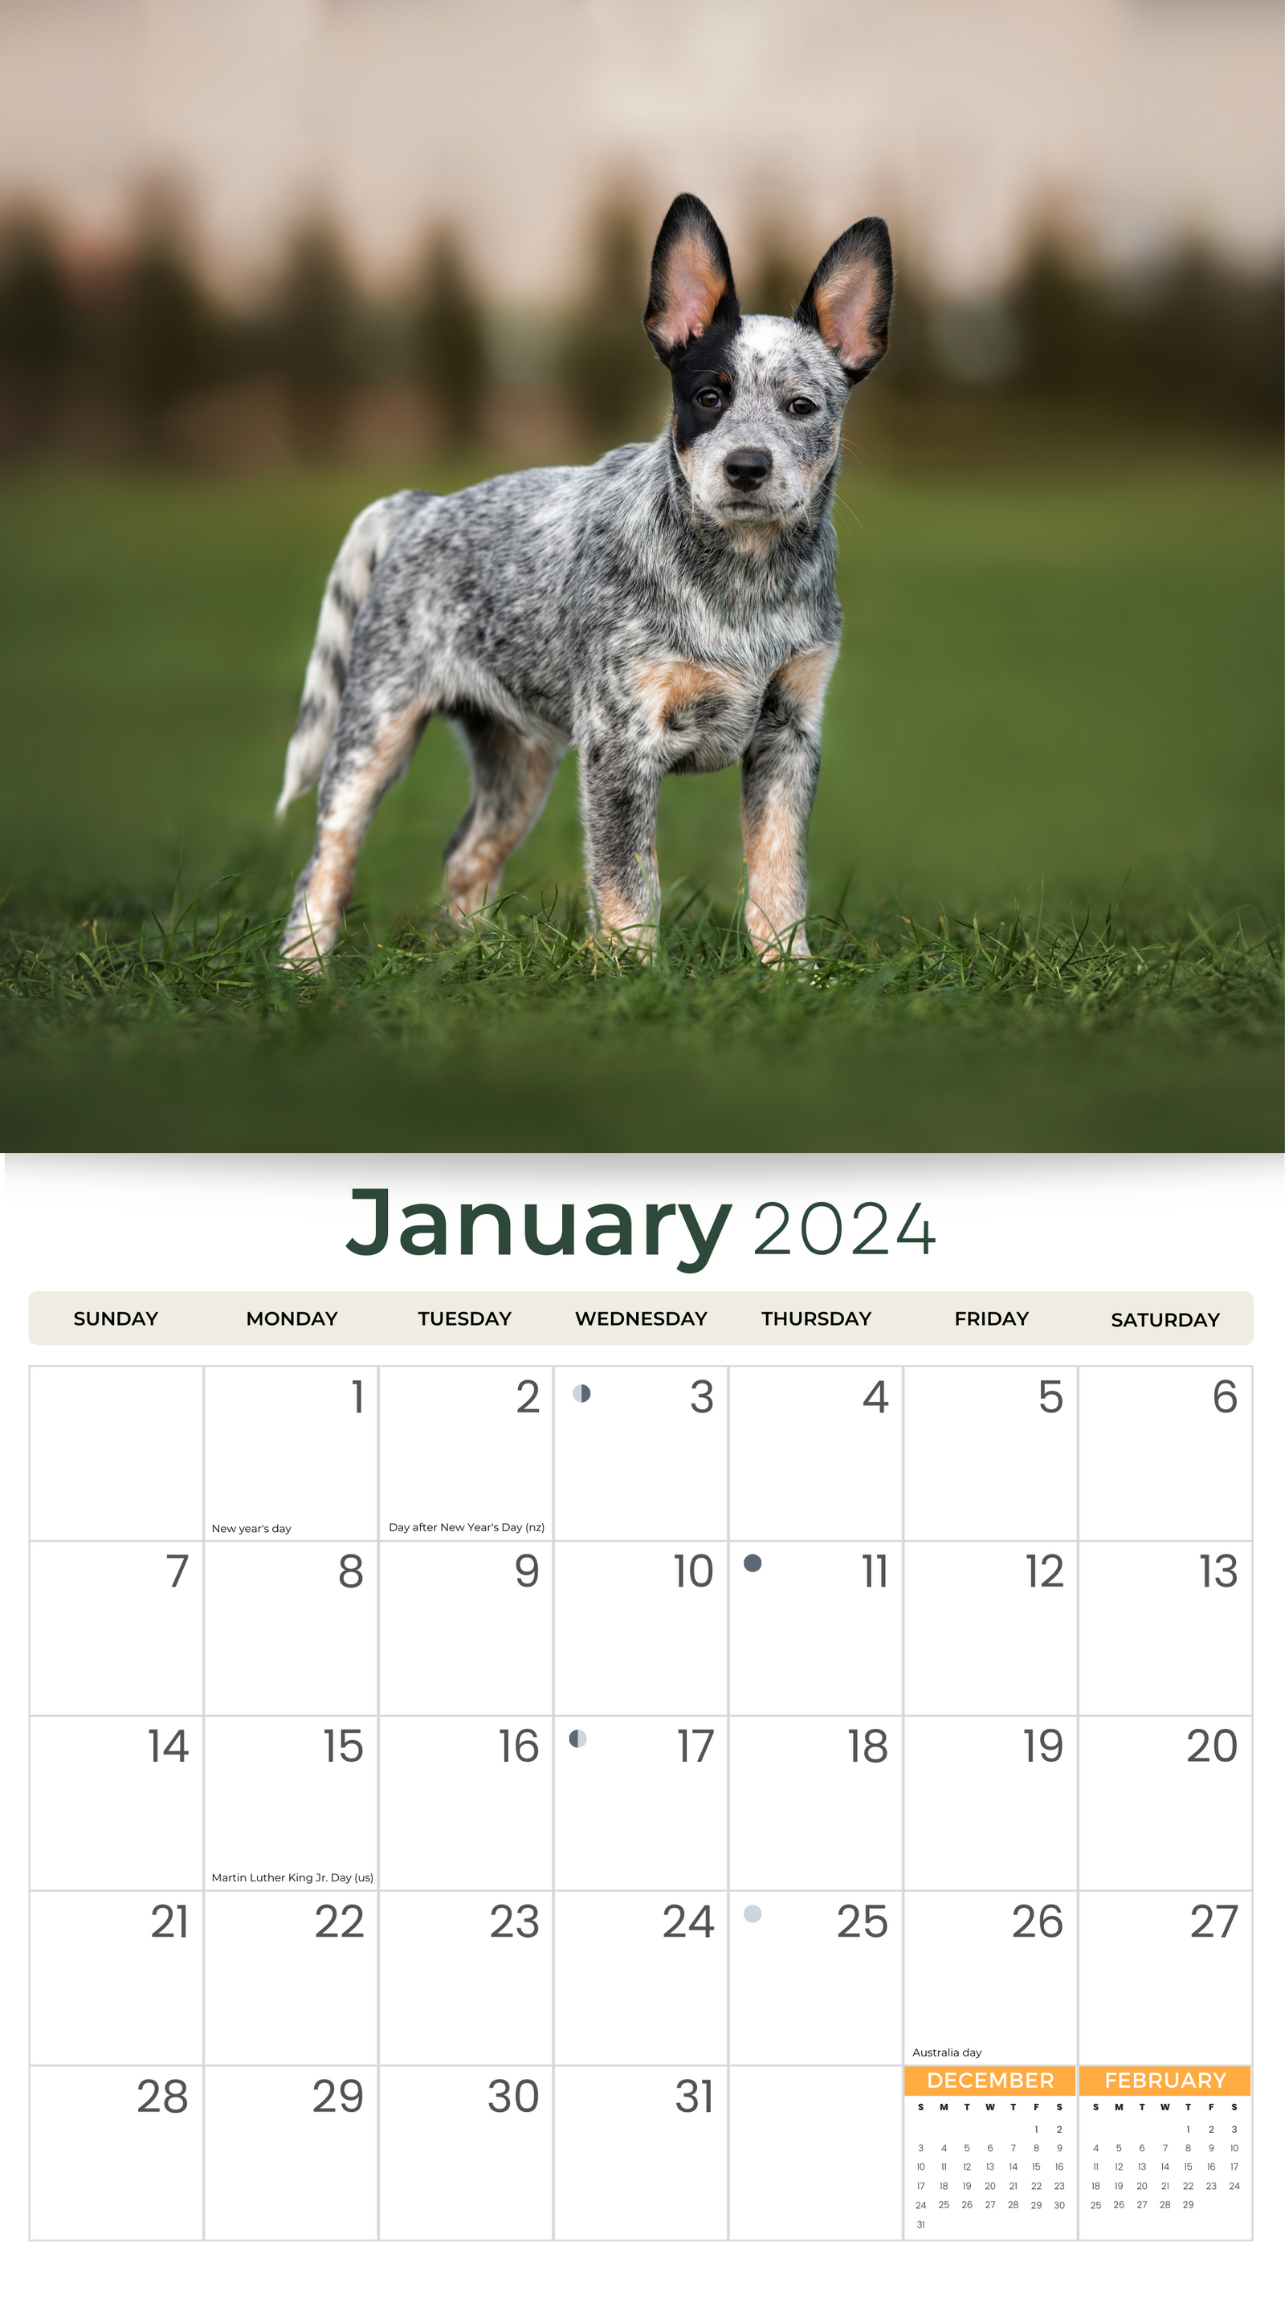 2024 Australian Cattle Dogs & Puppies - Deluxe Wall Calendar by Just Calendars - 16 Month - Plastic Free